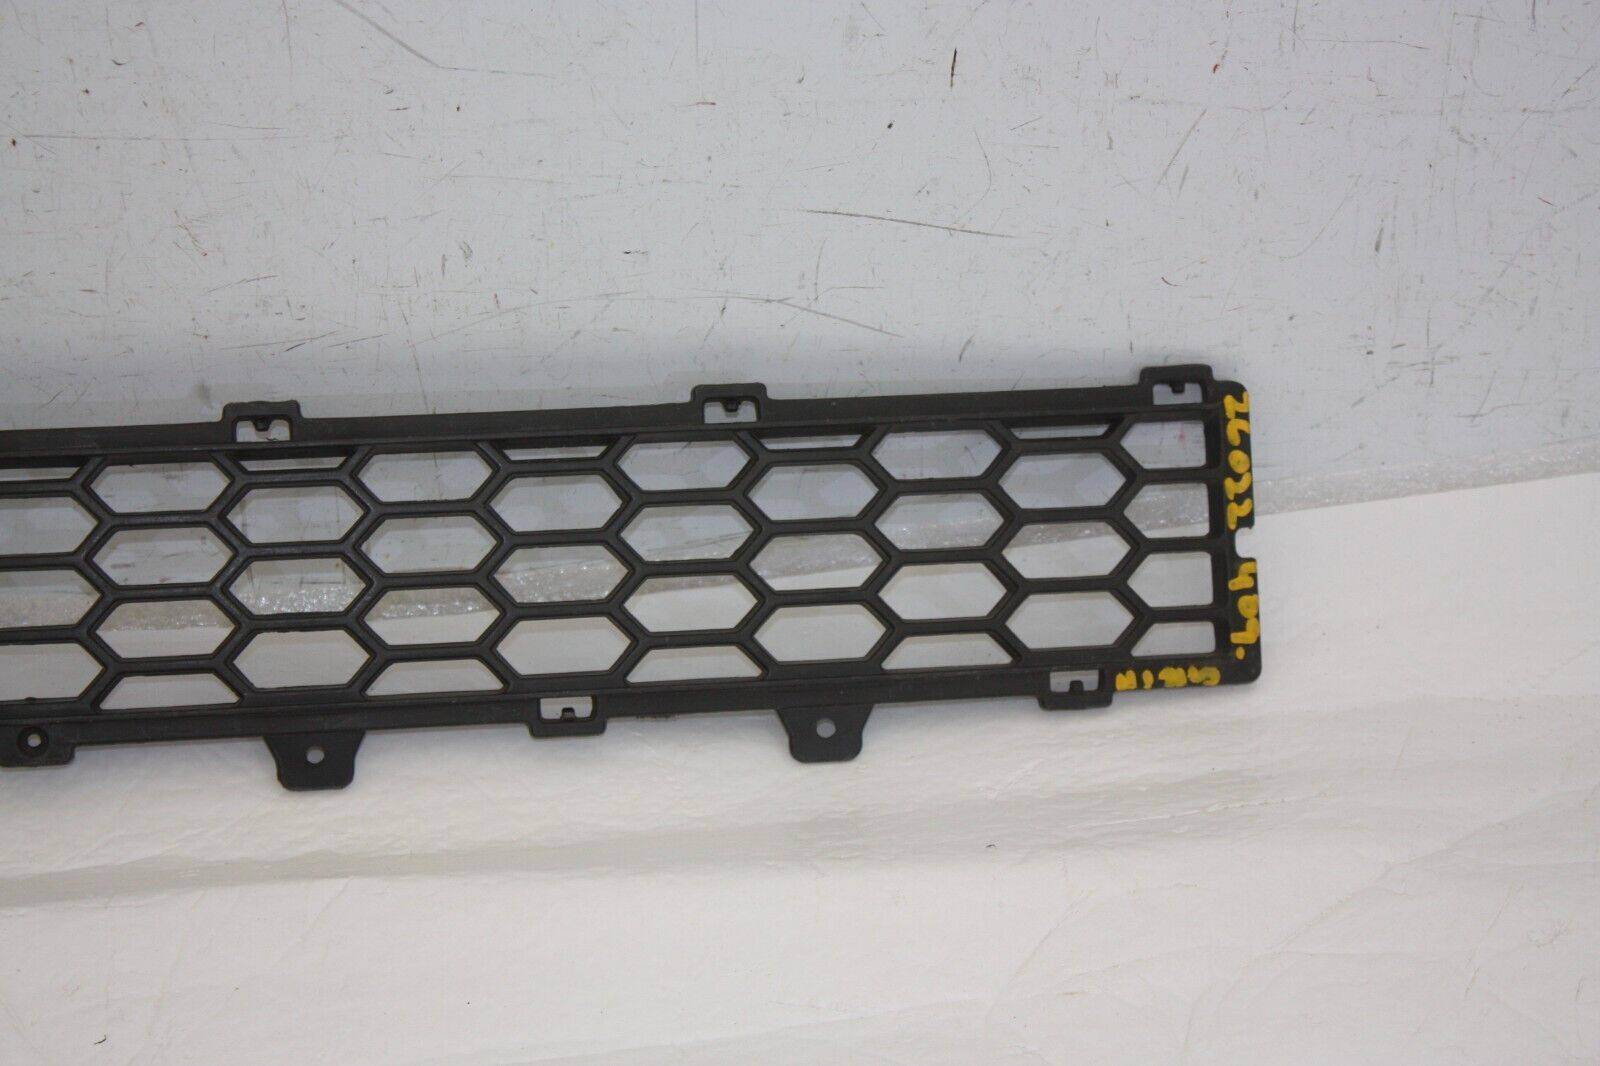 Chevrolet-Captiva-Front-Bumper-Lower-Grill-2006-to-2011-96623441-Genuine-176268252421-2